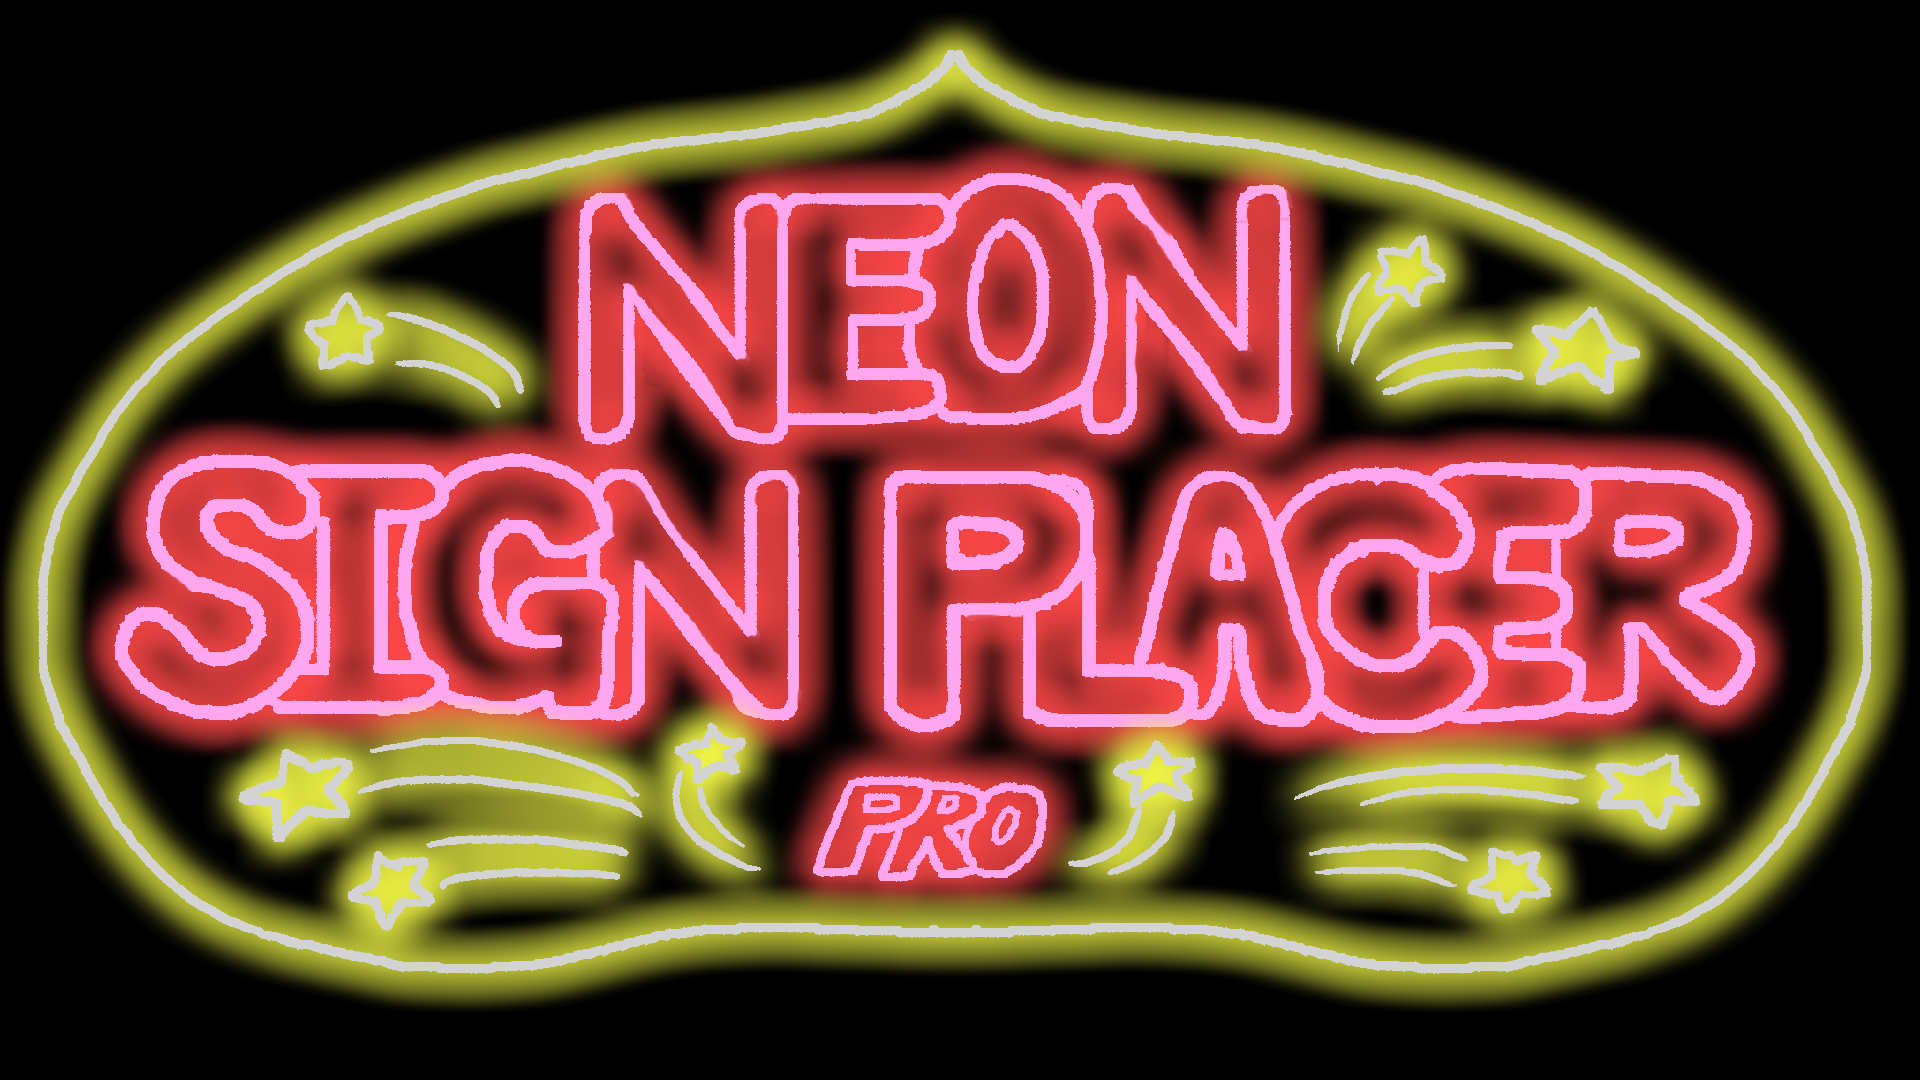 Neon Sign Placer Pro